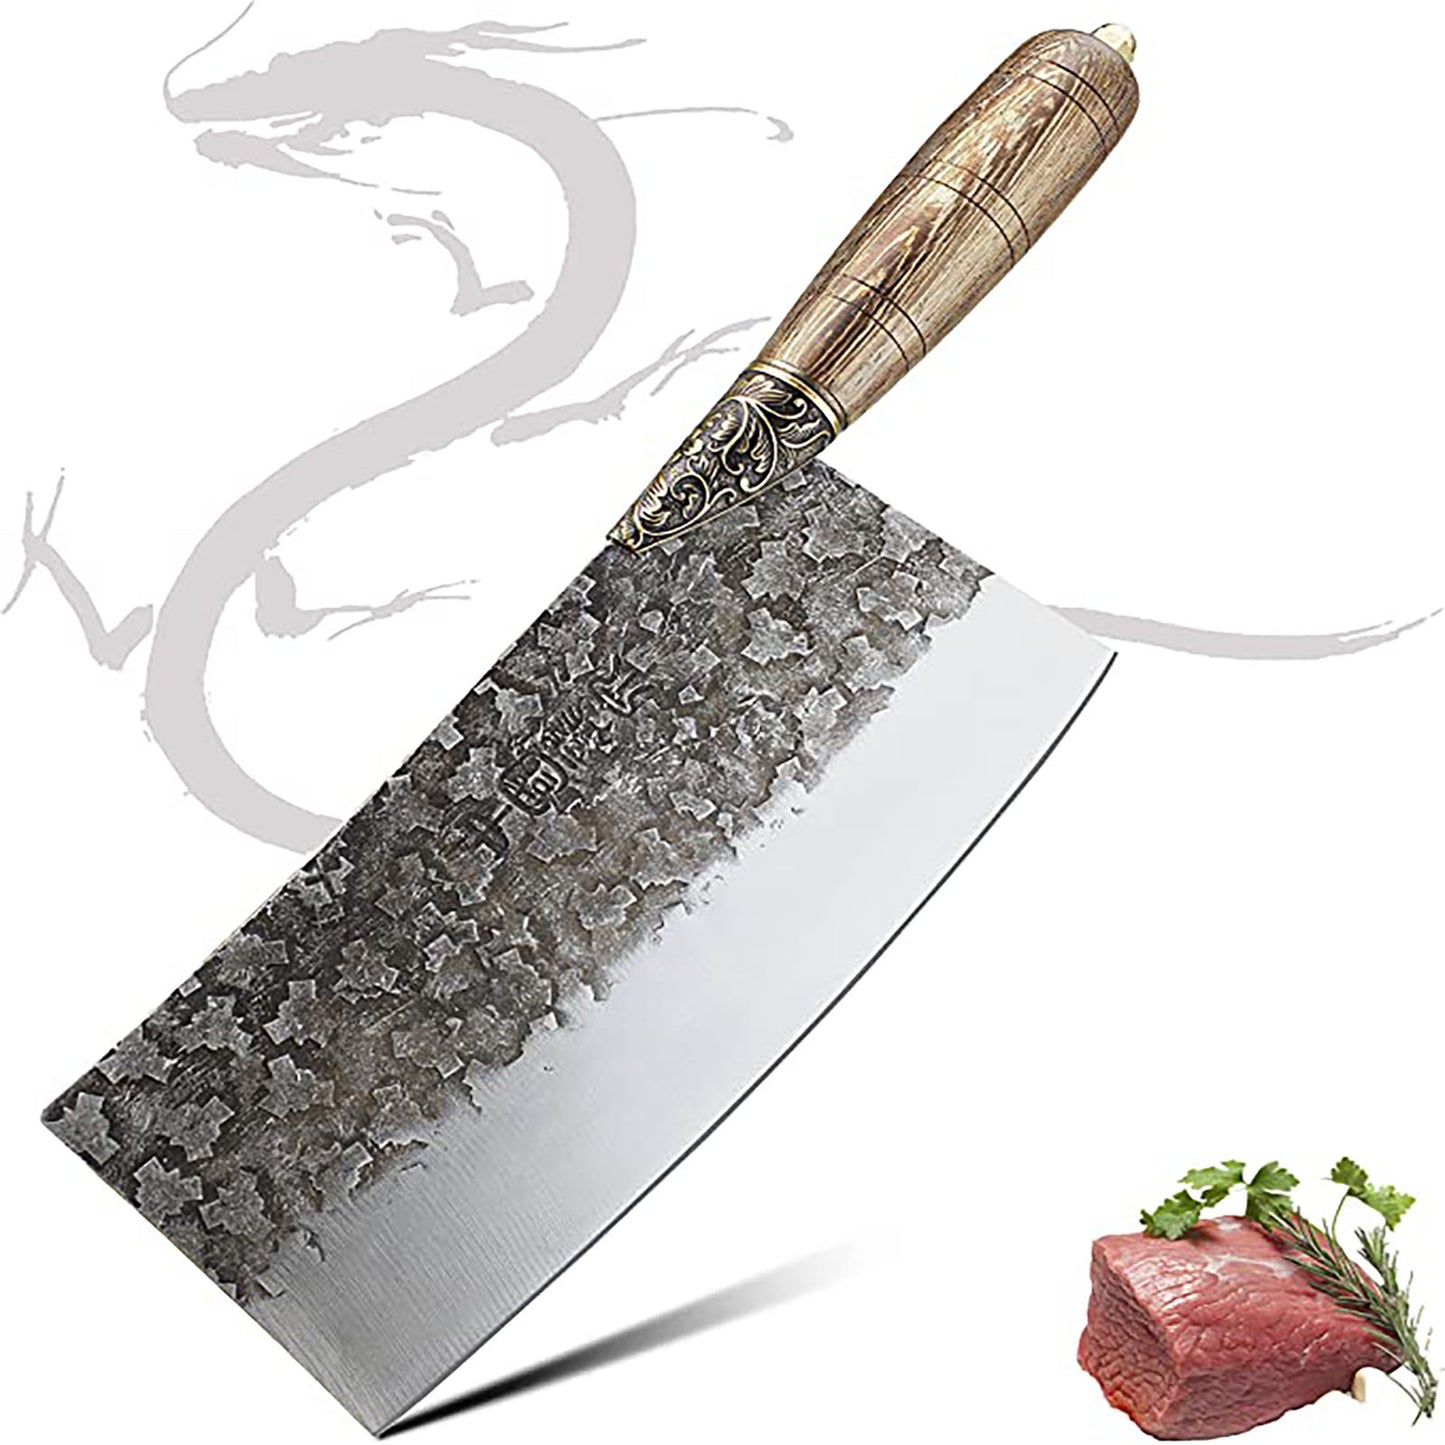 Long Quan Chinese Knife High Carbon Steel